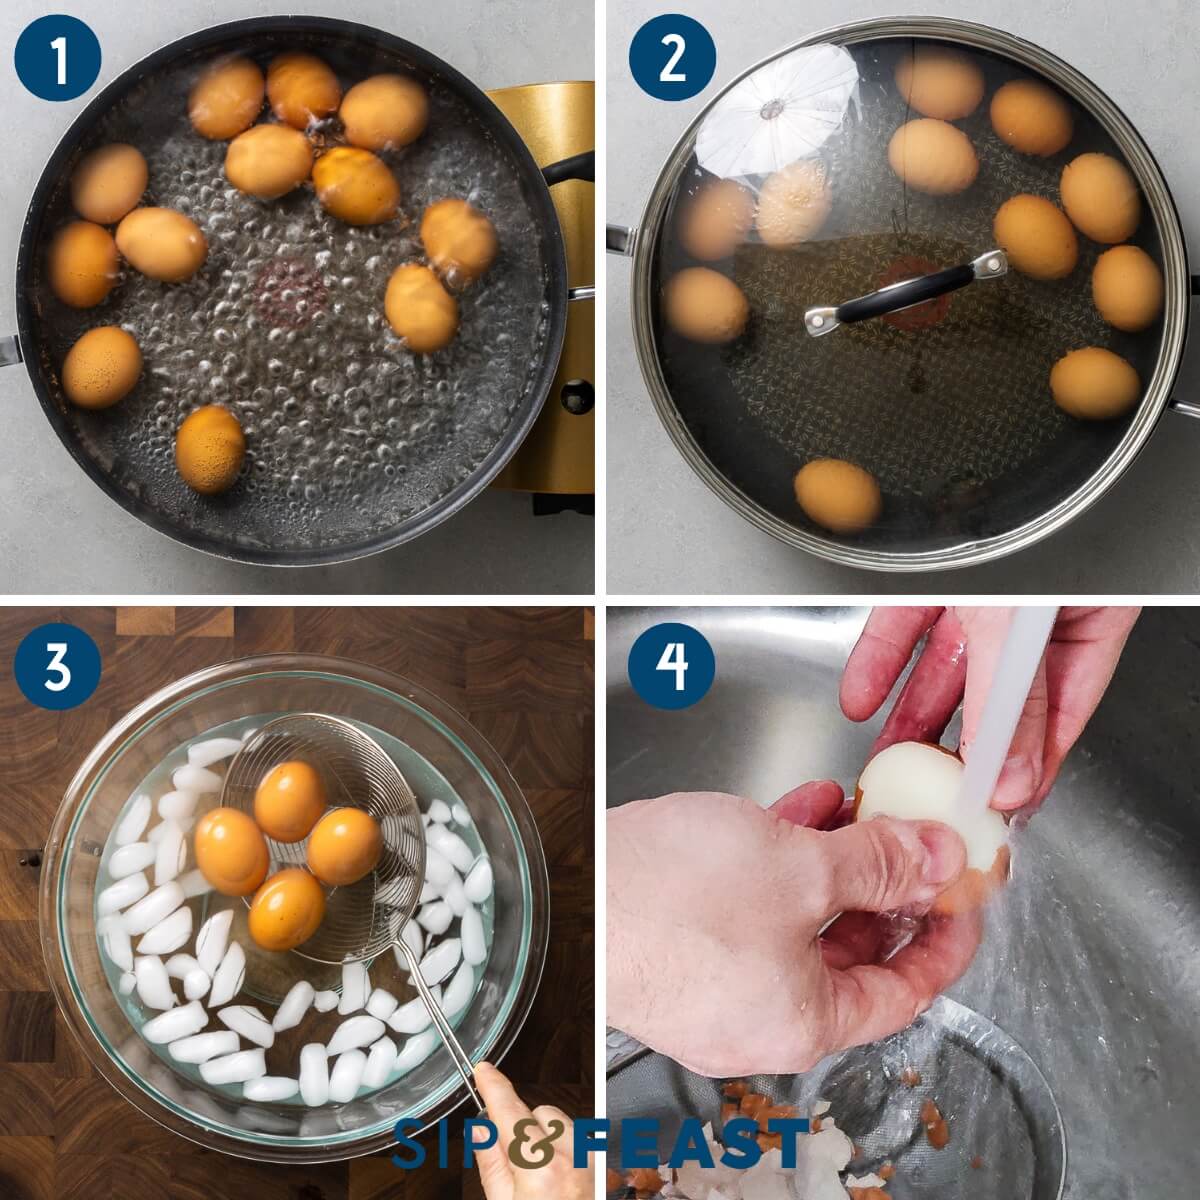 Deviled eggs recipe process shot collage group one showing boiling of eggs, placing them into ice bath, and removing the sheels under running water.